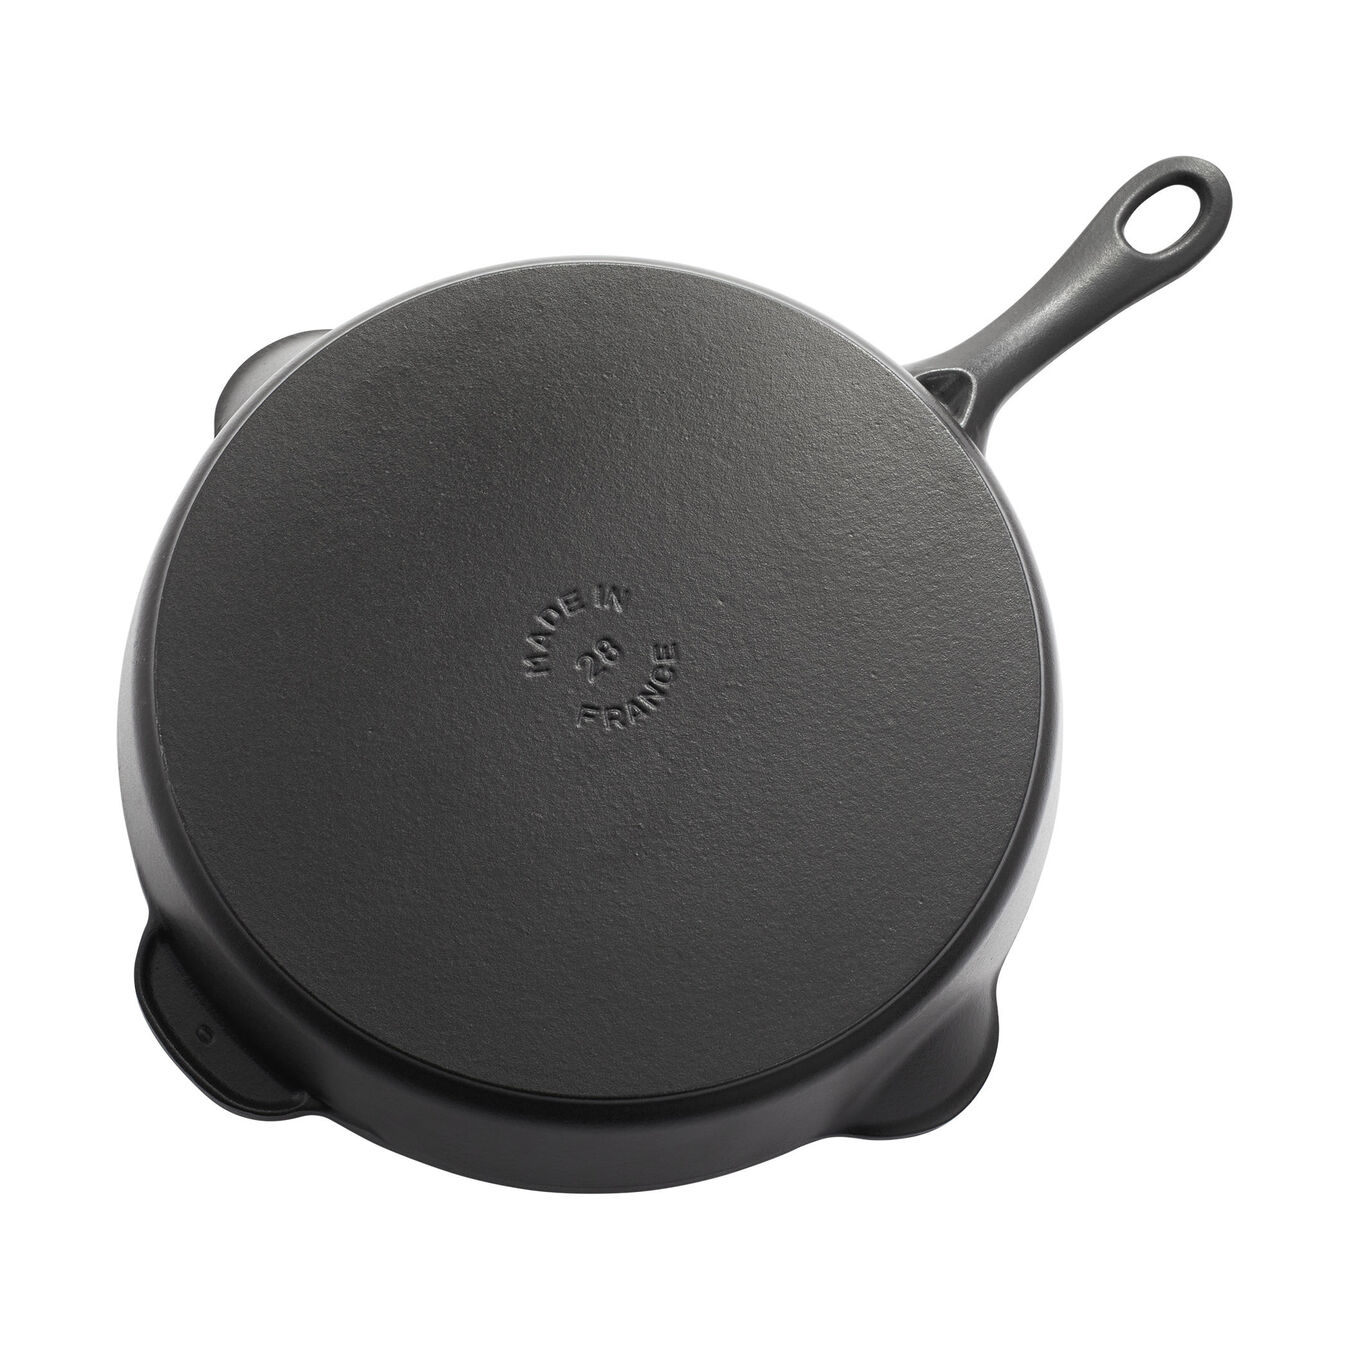 11-inch, Frying pan, black matte - Visual Imperfections,,large 4